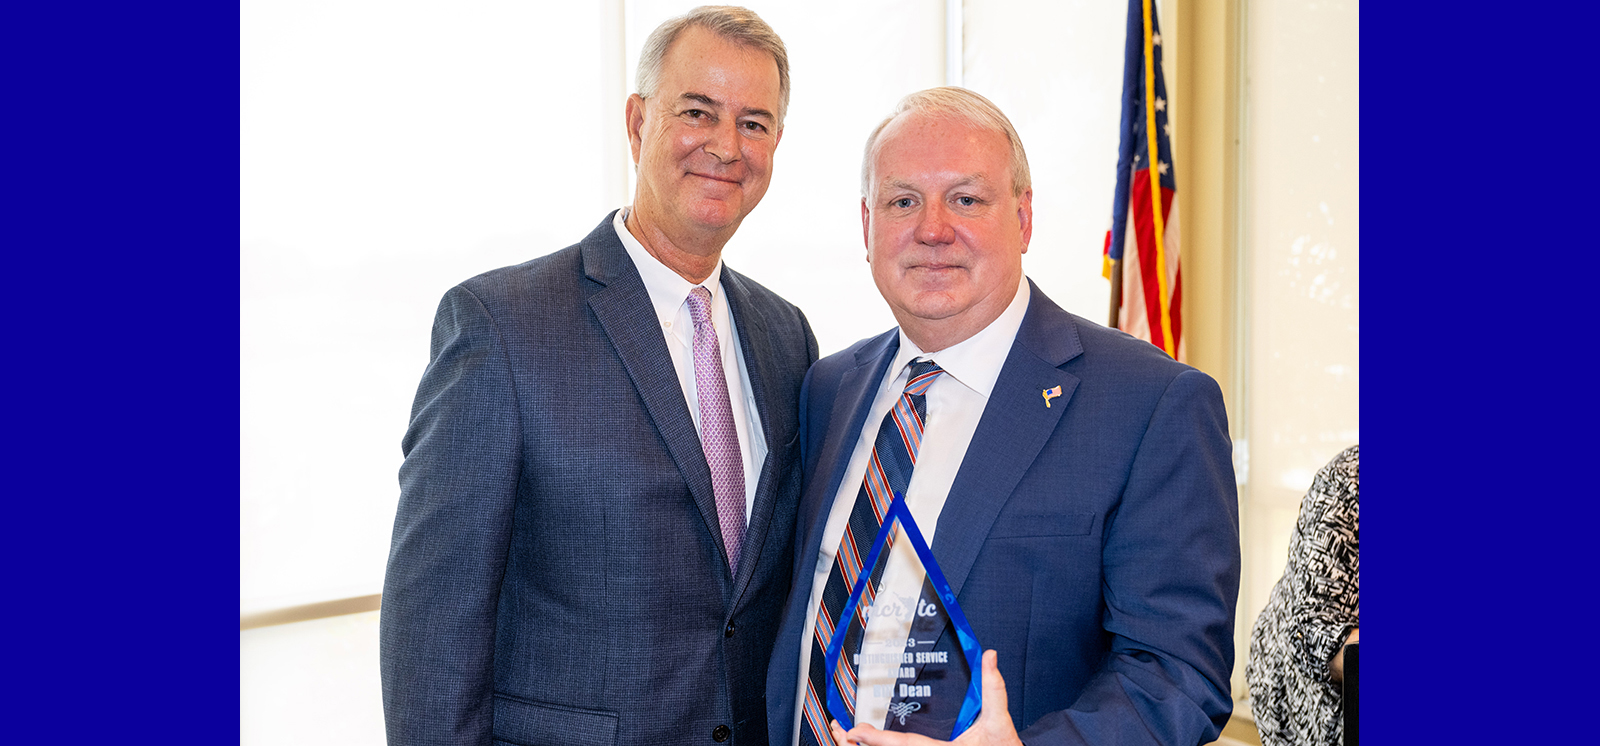 Water Pointe’s Managing Broker Receives Distinguished Service Award